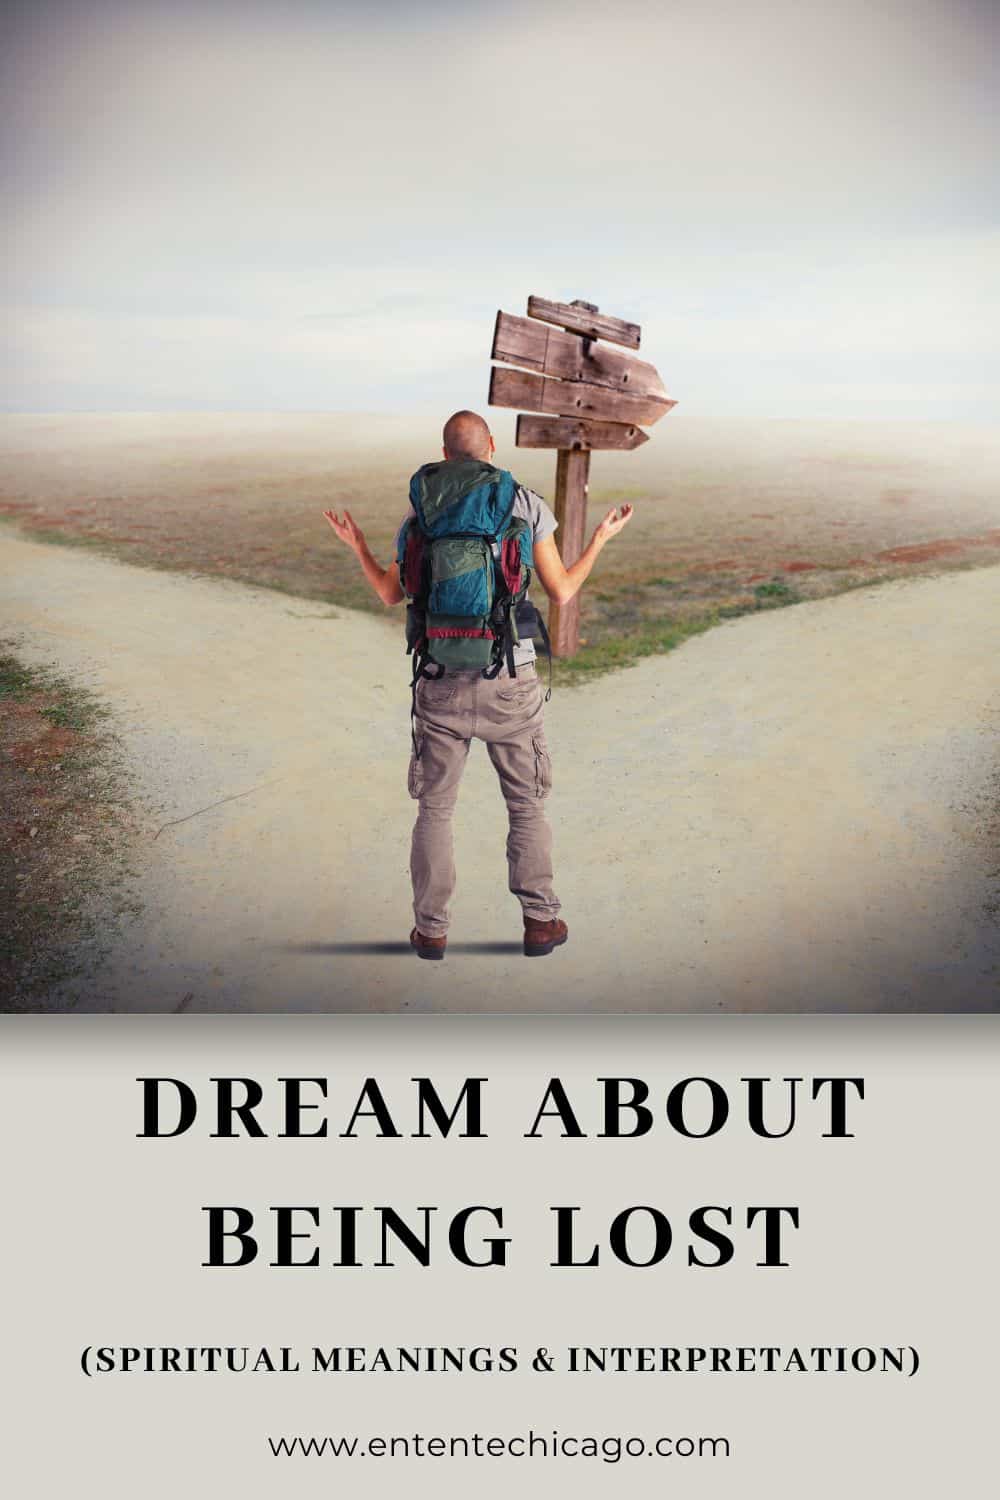 Dream About Being Lost (Spiritual Meanings & Interpretation)